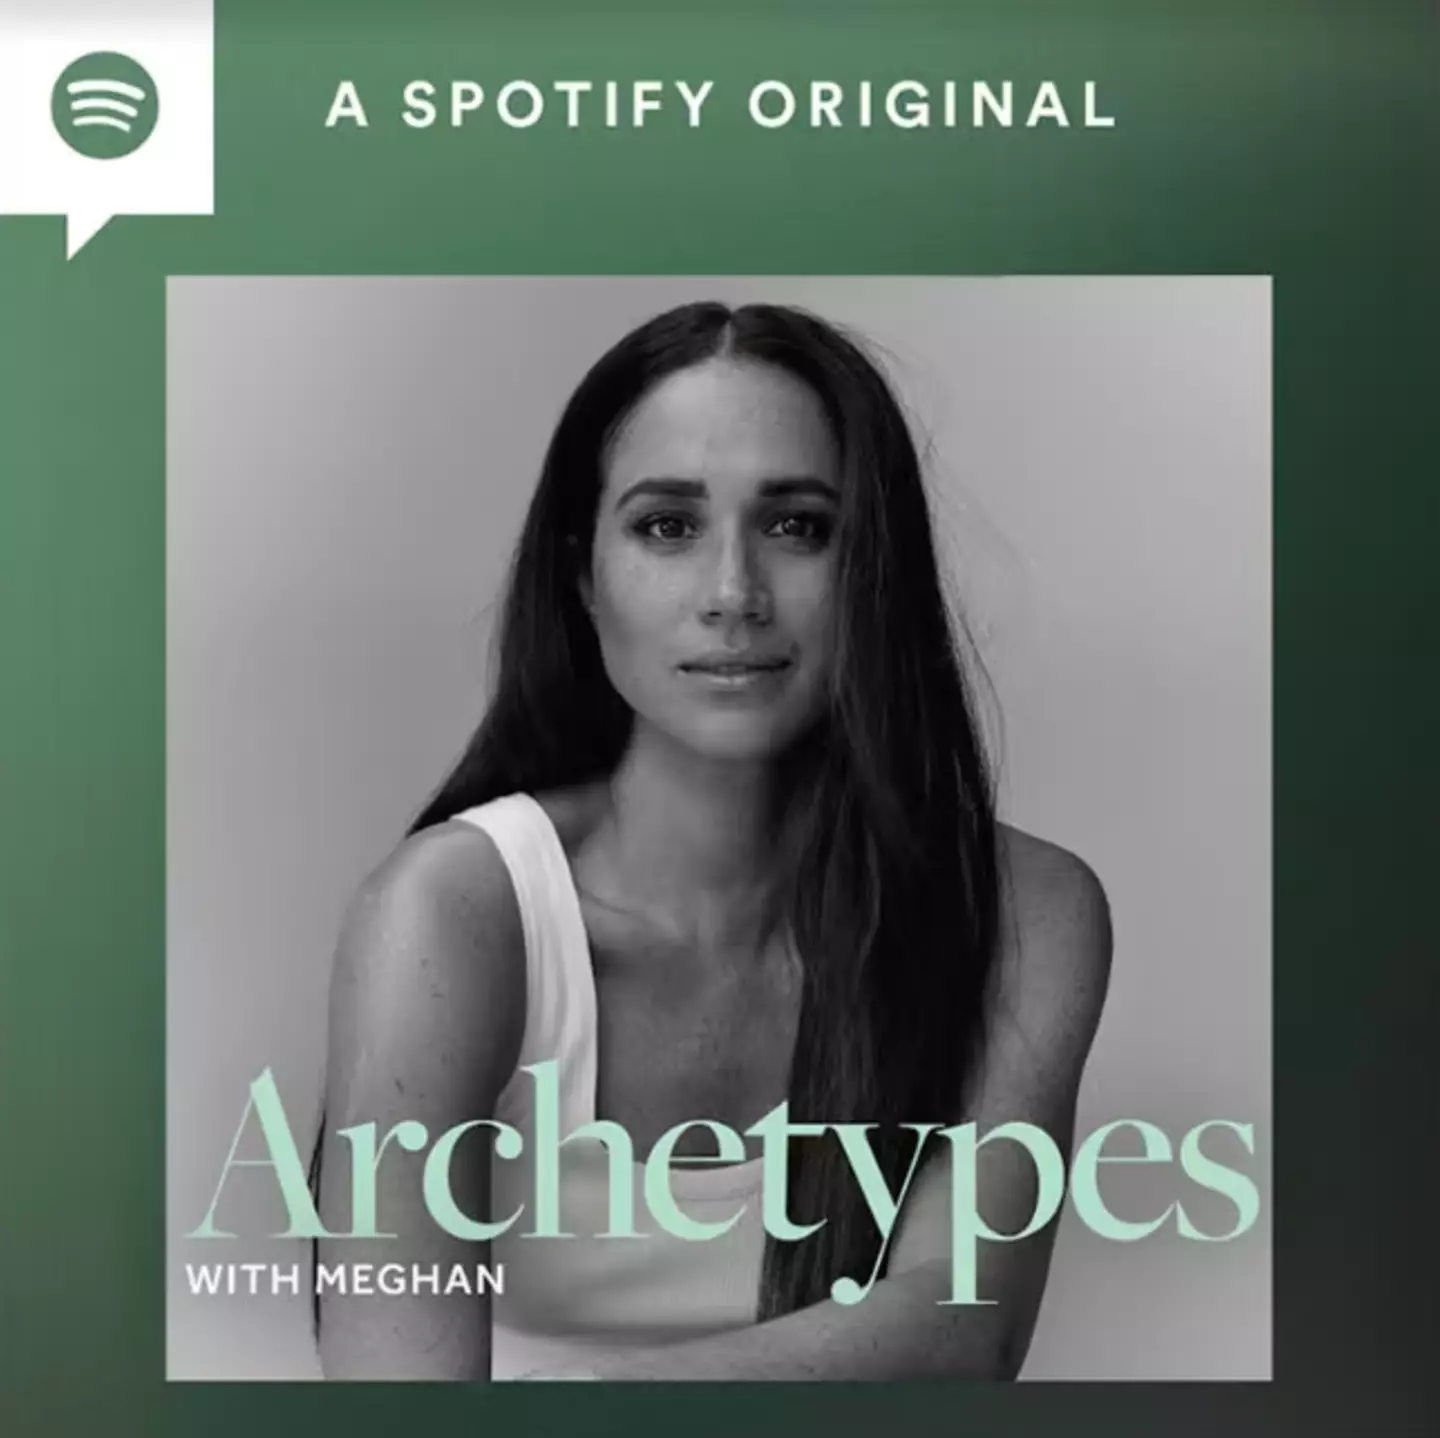 Meghan Markle's new podcast, Archetypes, has launched on Spotify.